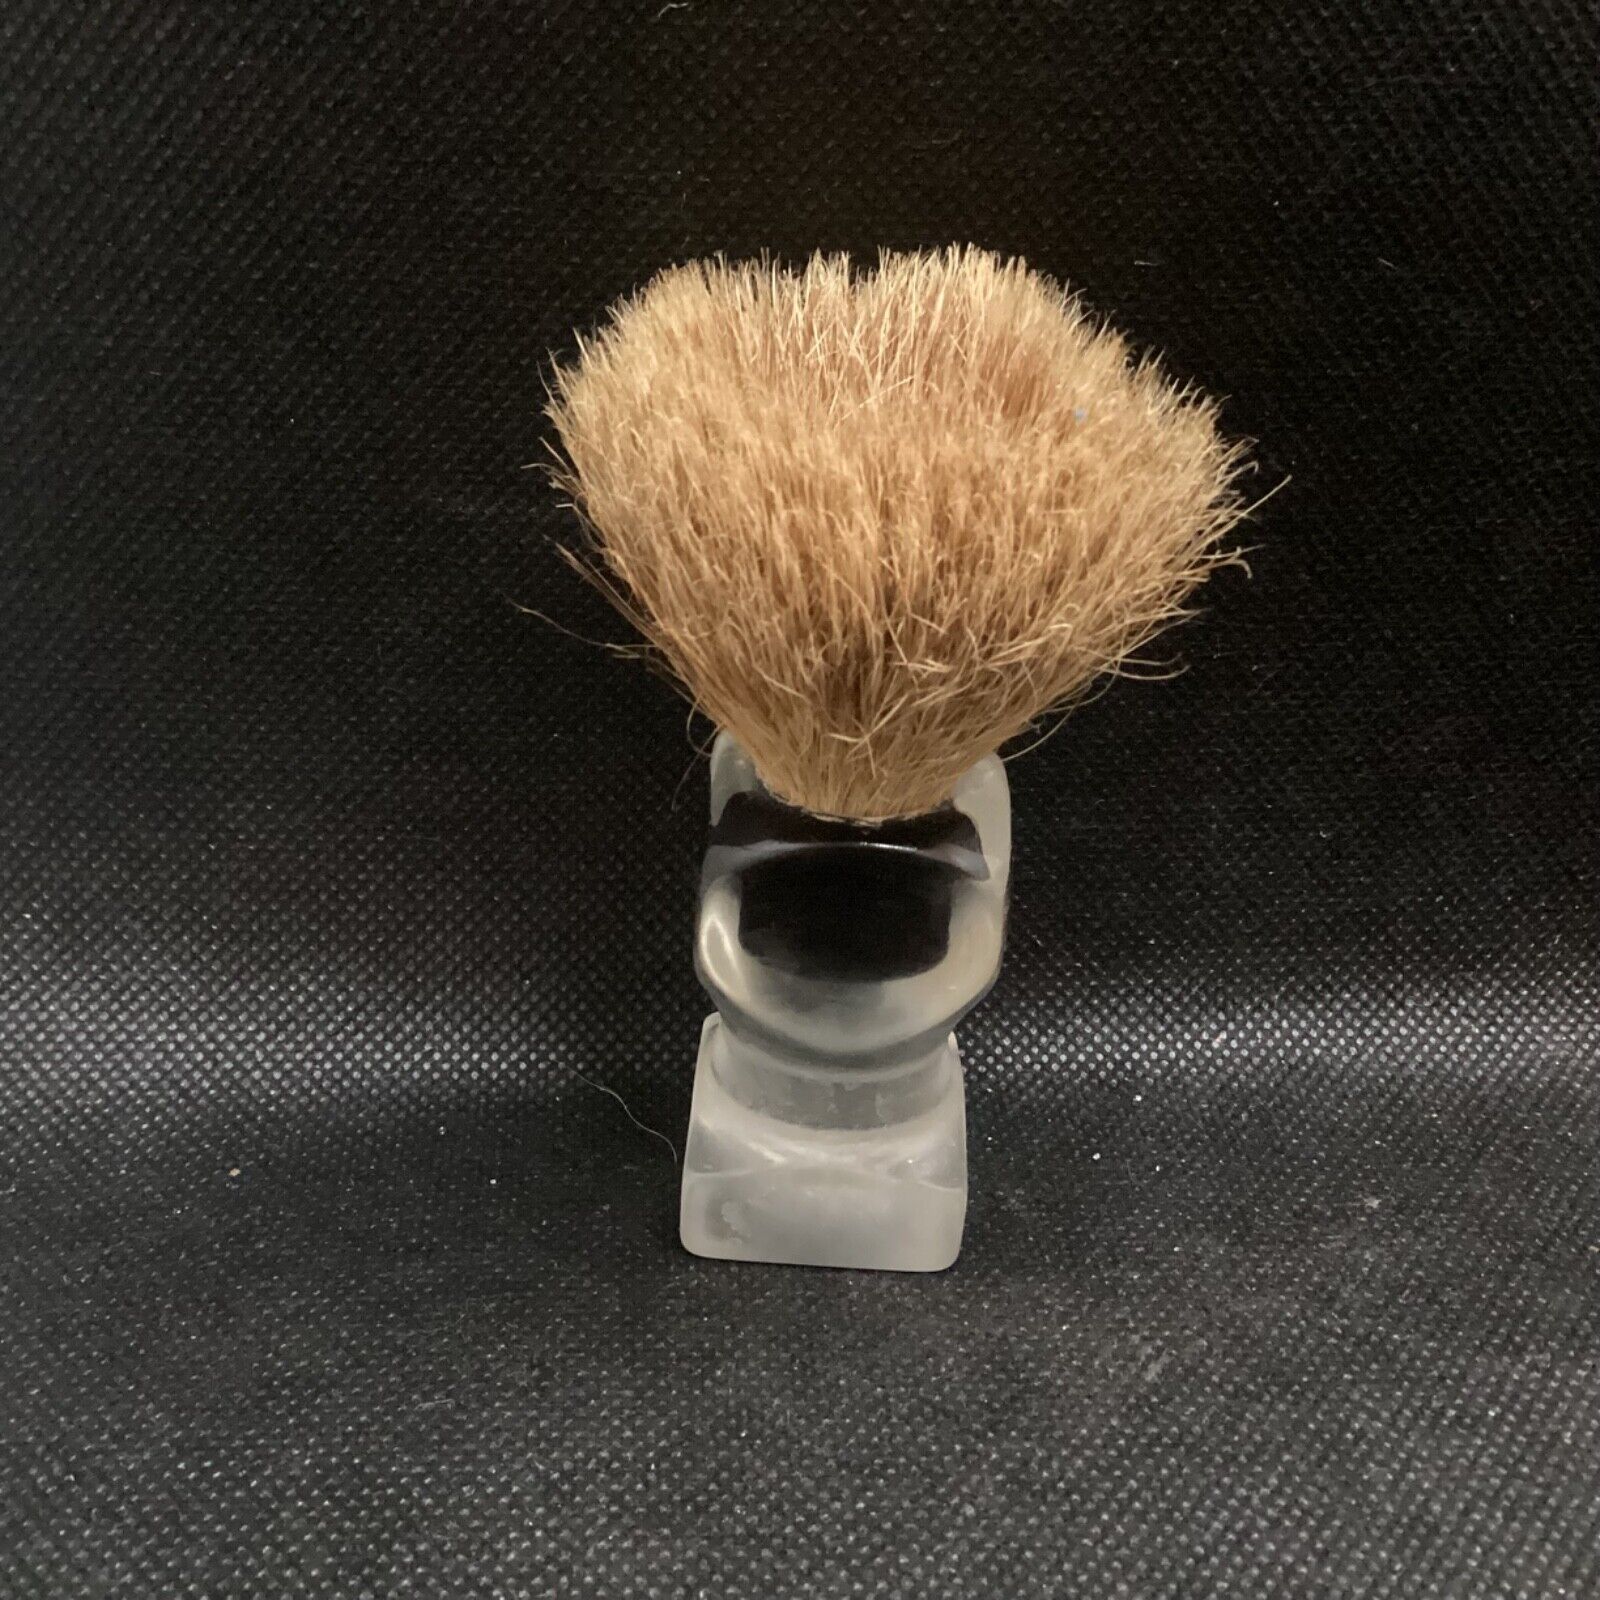 Vintage Made Rite shaving Brush - Pure Badger No. 62  U.S.A. Lucite handle